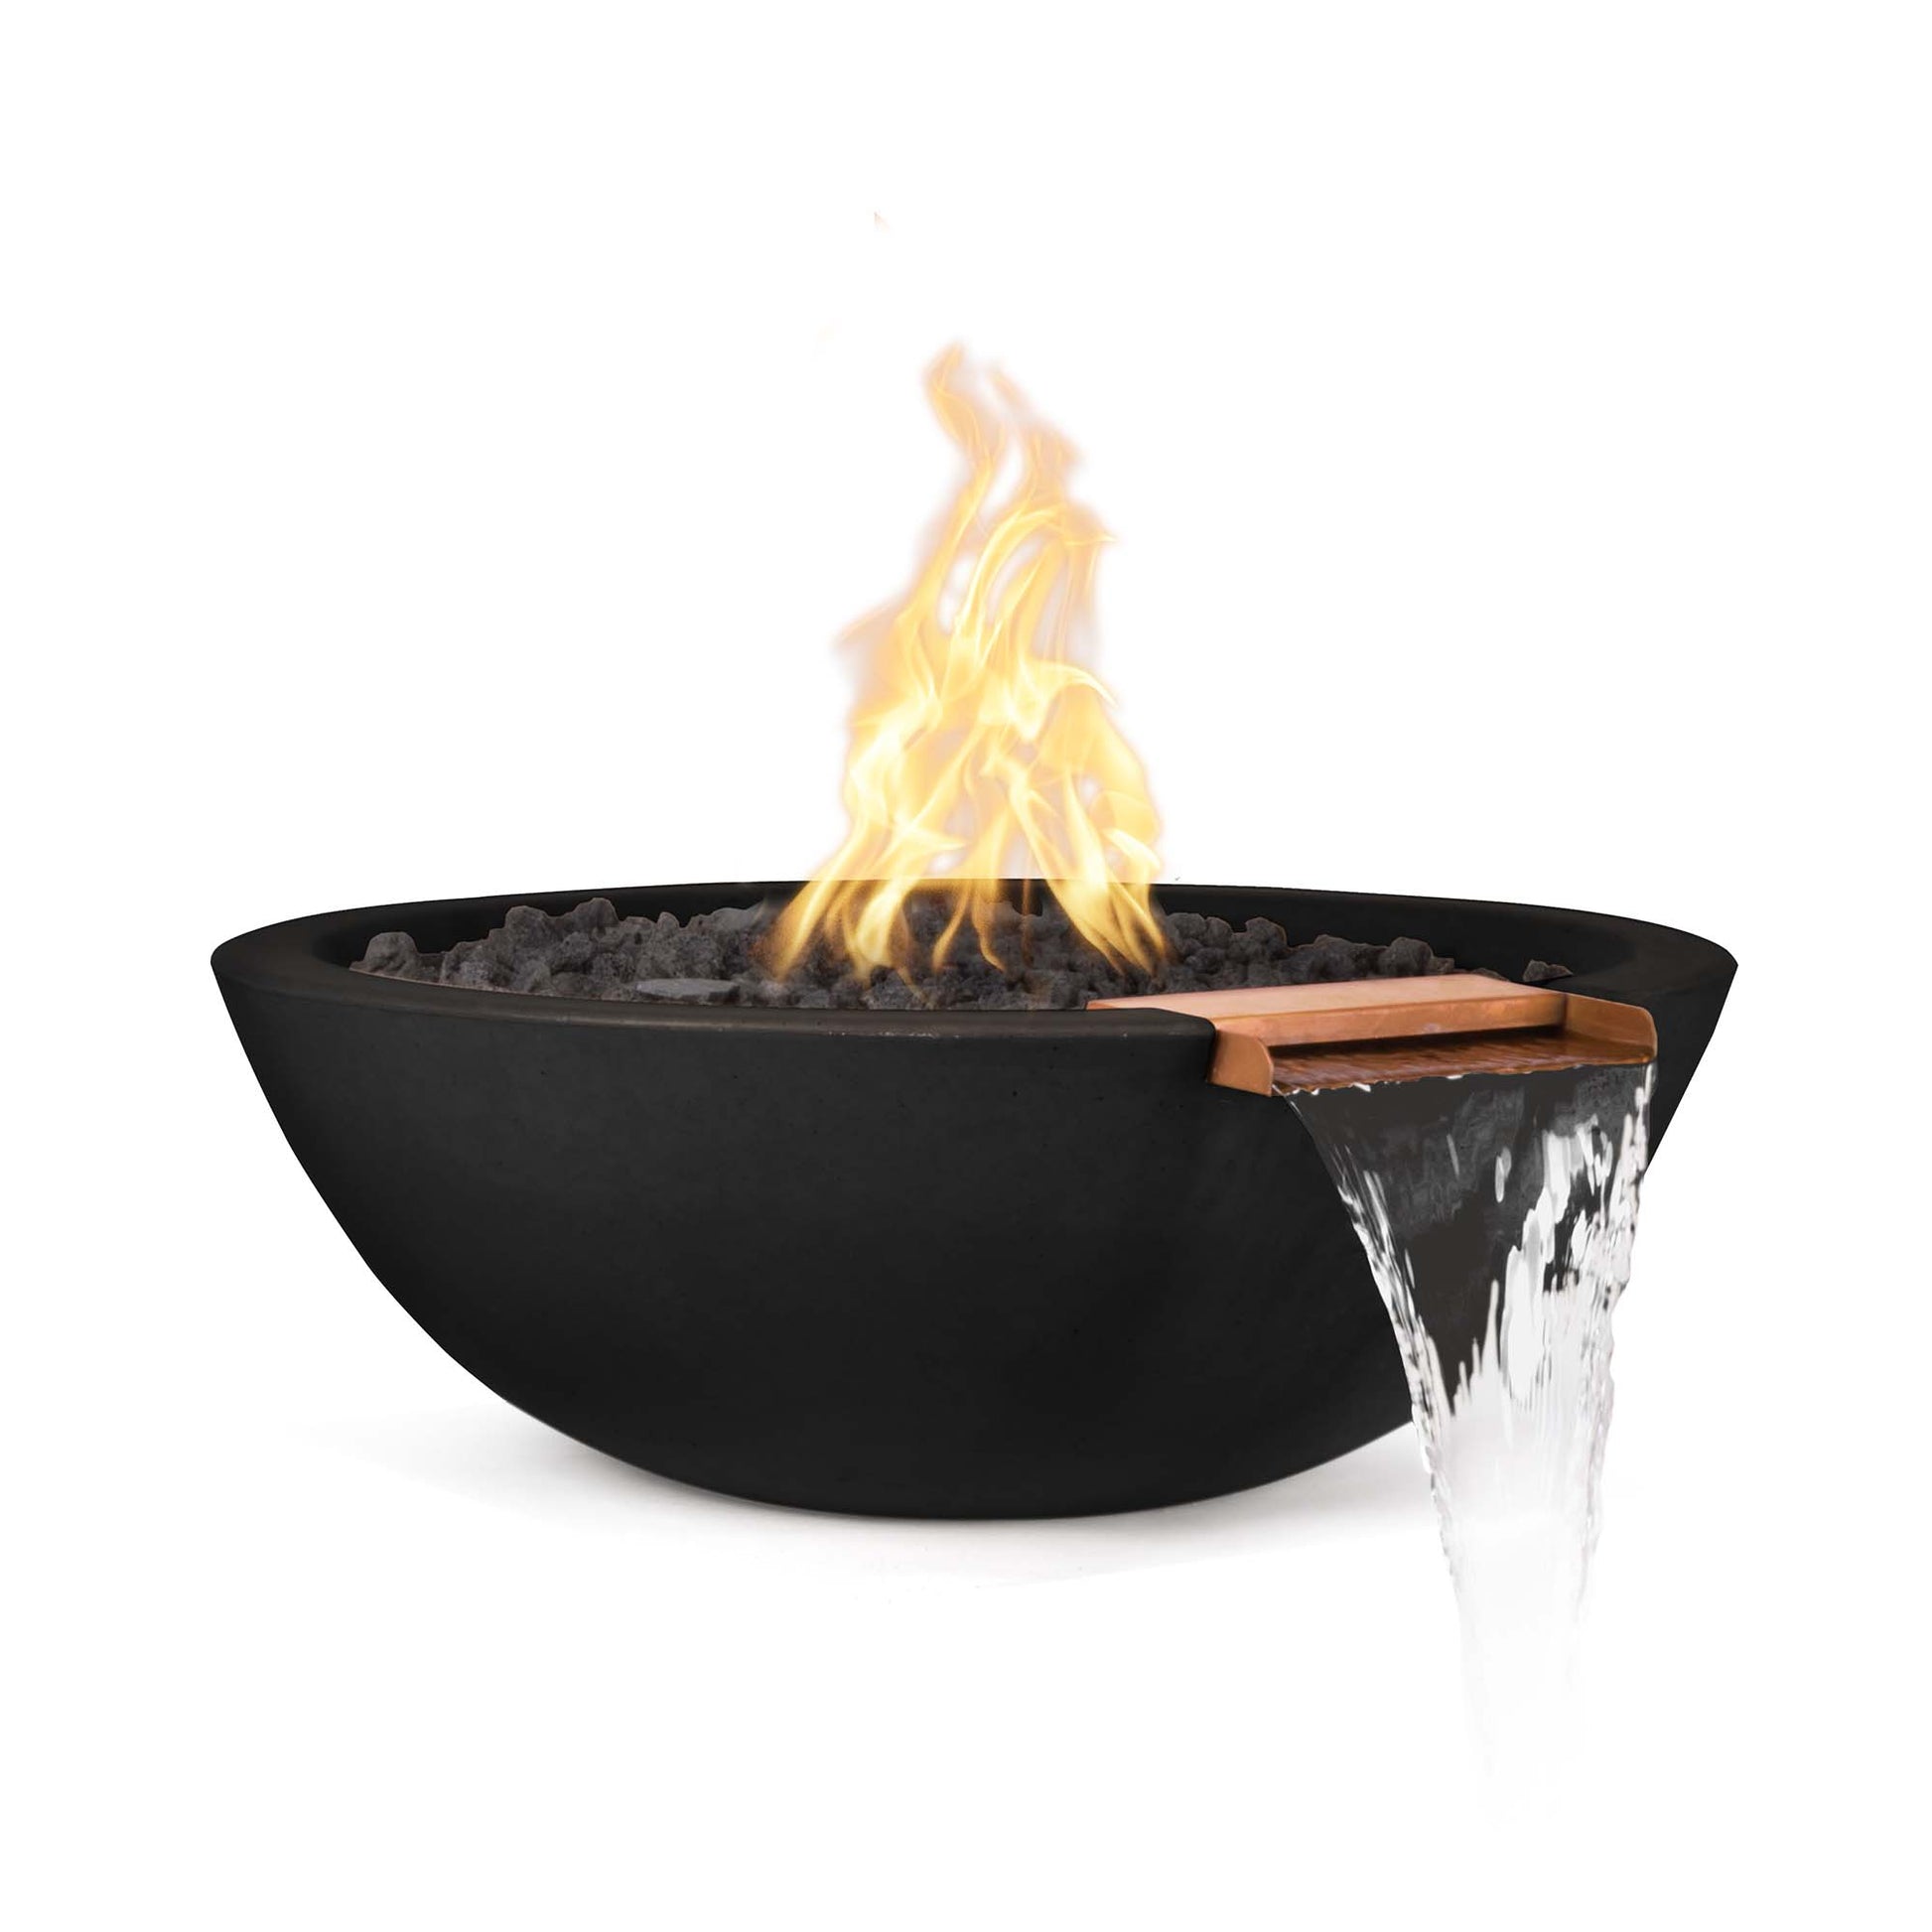 The Outdoor Plus Round Sedona 33" Metallic Pearl GFRC Concrete Liquid Propane Fire & Water Bowl with Match Lit with Flame Sense Ignition